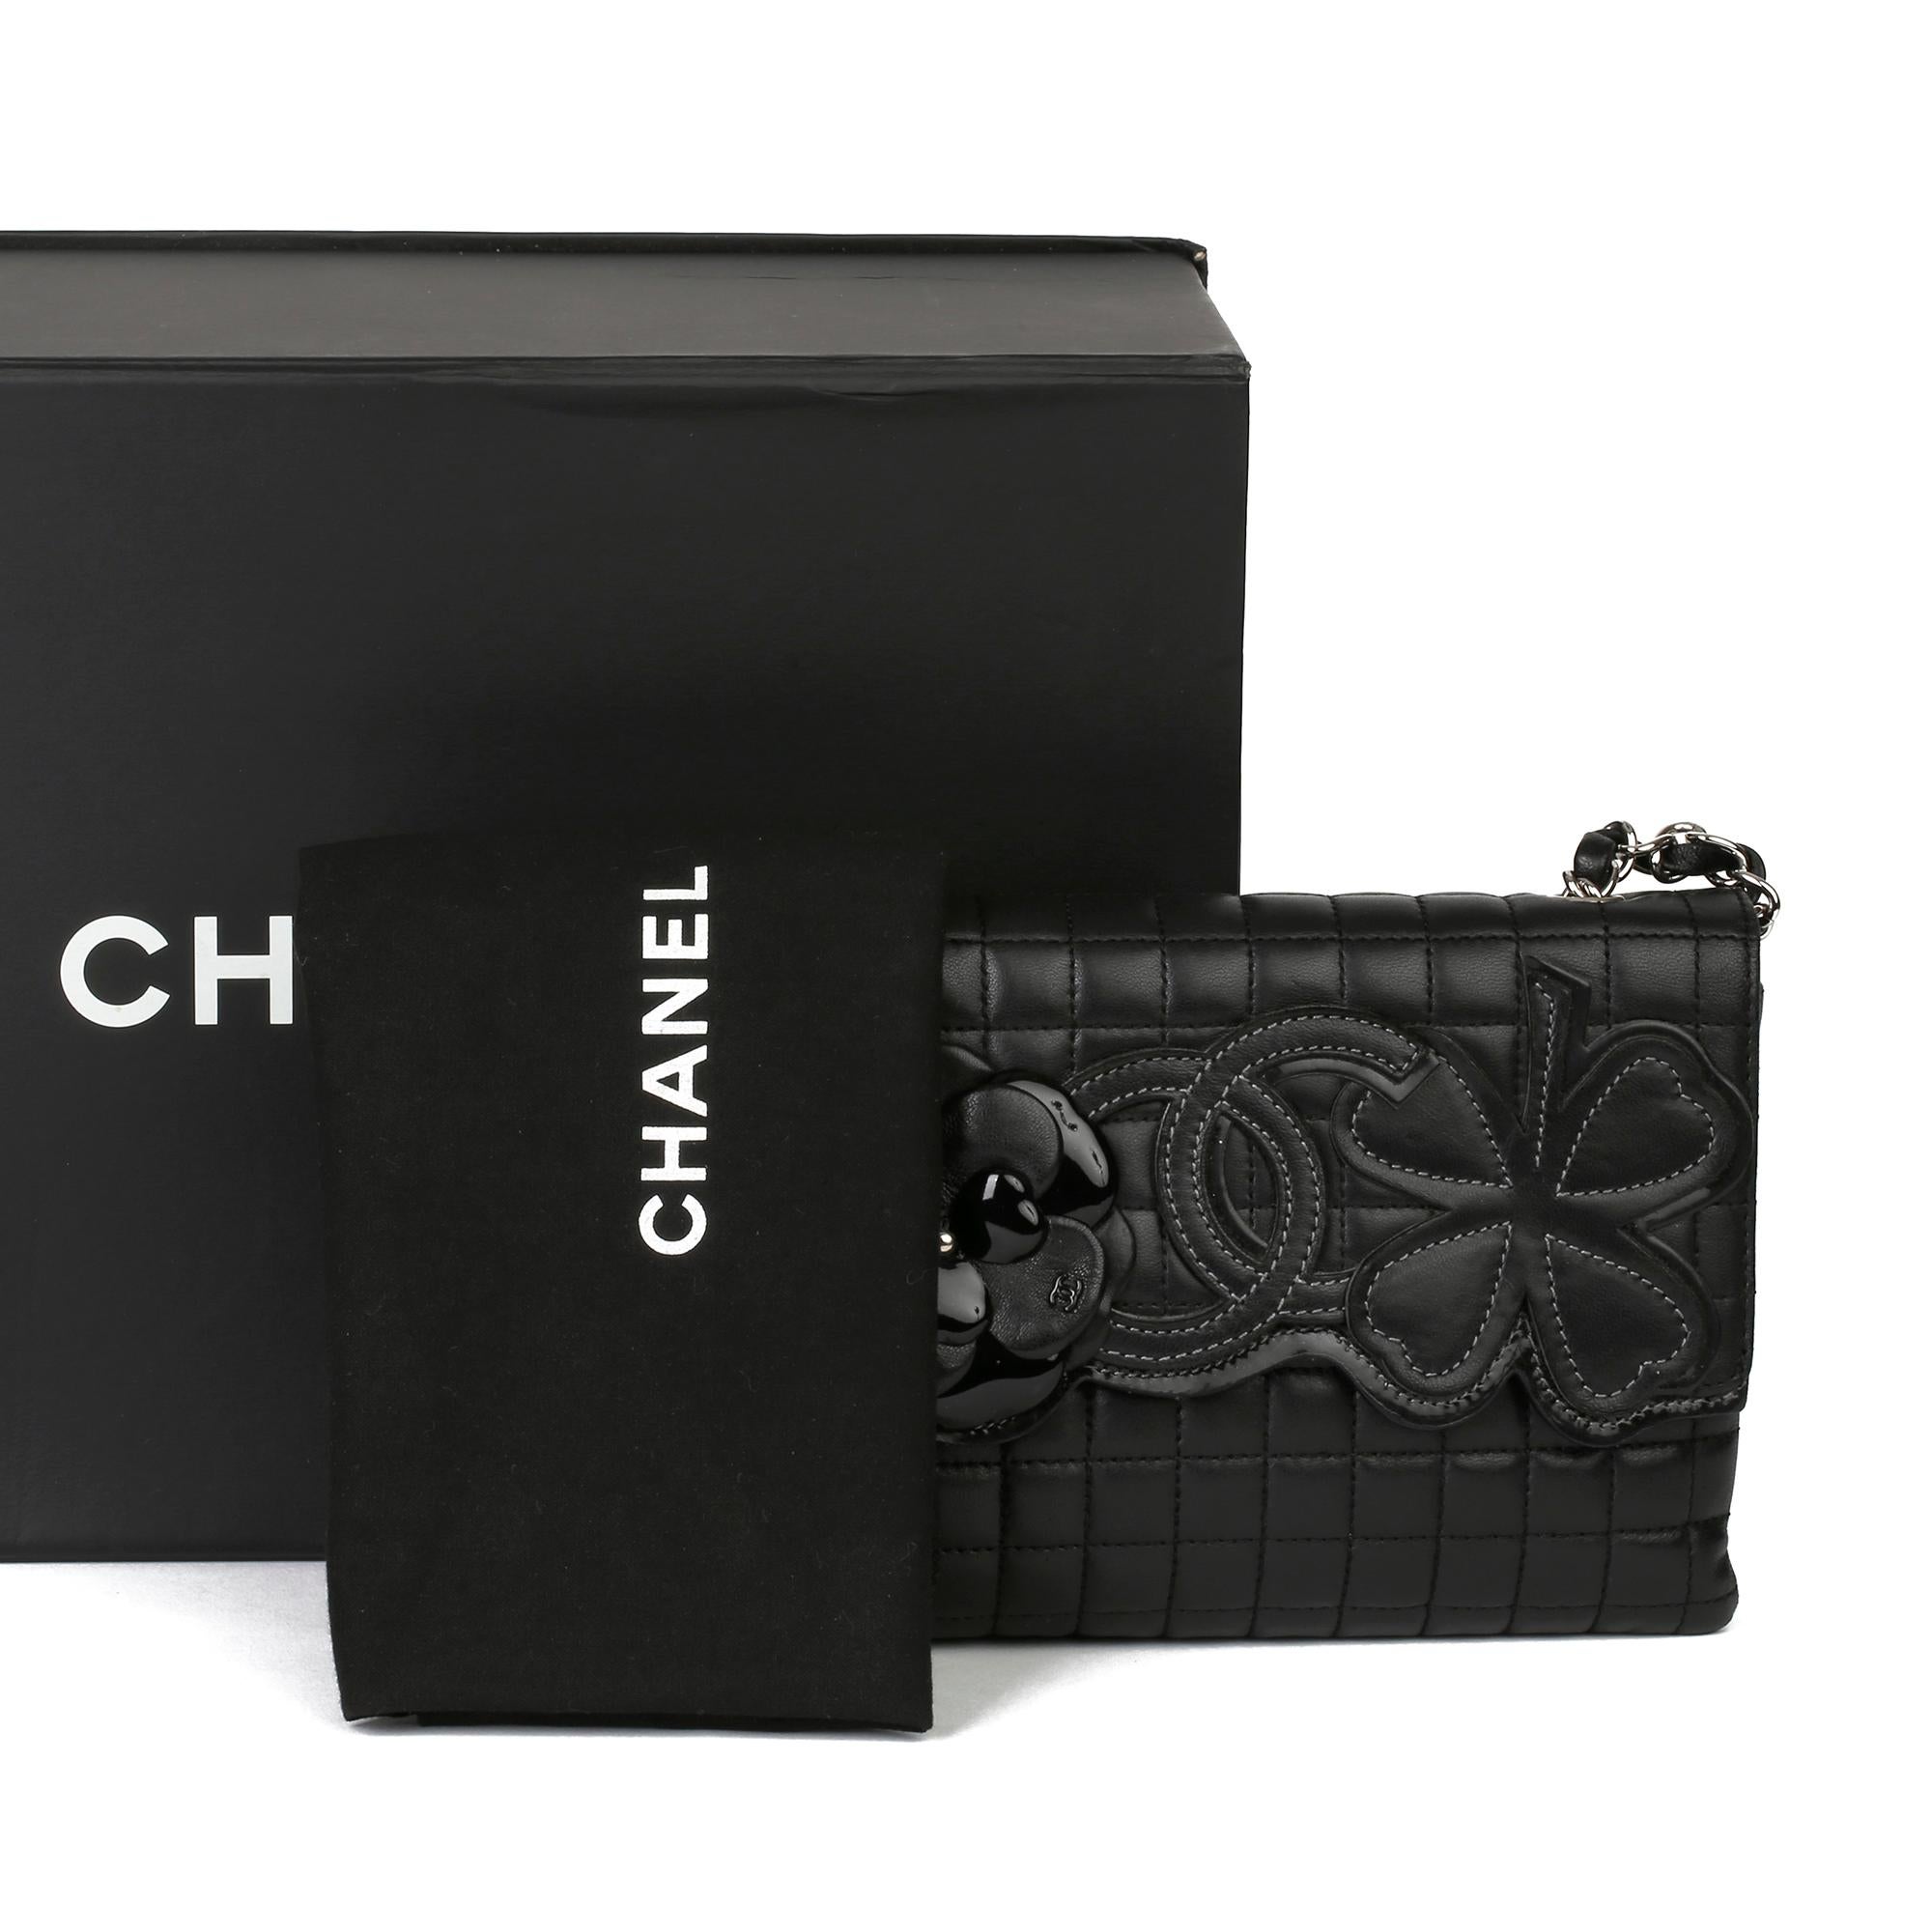 2005 Chanel Black Chocolate Bar Quilted Lambskin & Patent Leather No. 5 Camellia 7